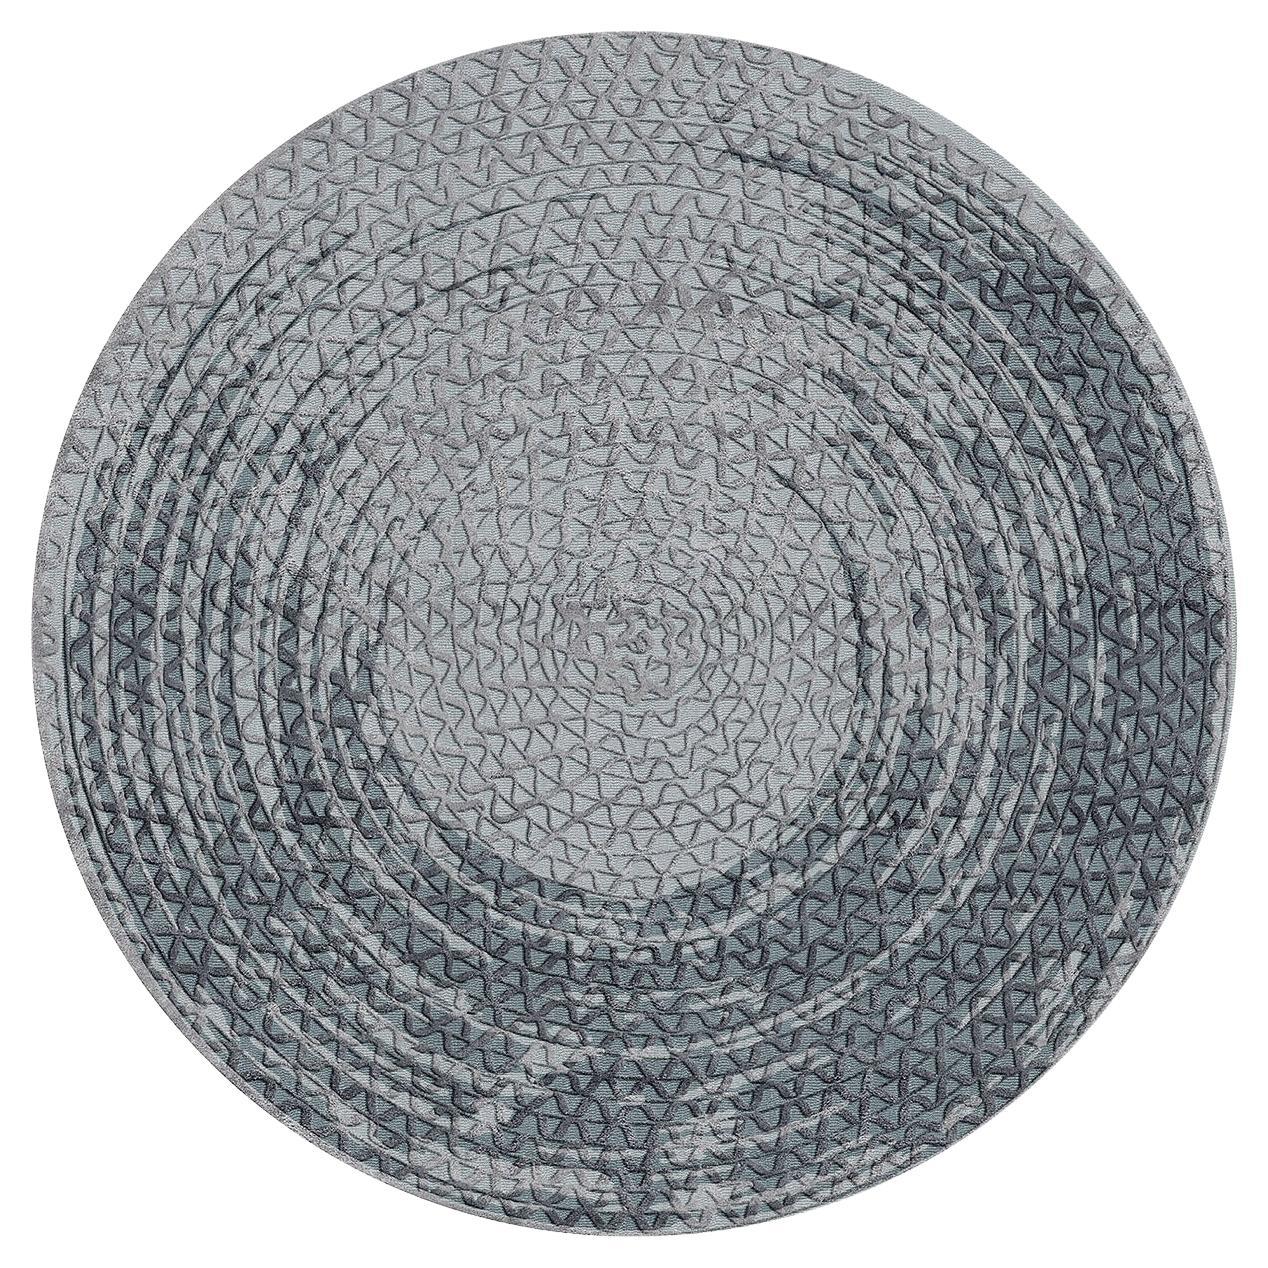 Triple Waves Round Gray Rug by Lorenza Bozzoli  For Sale